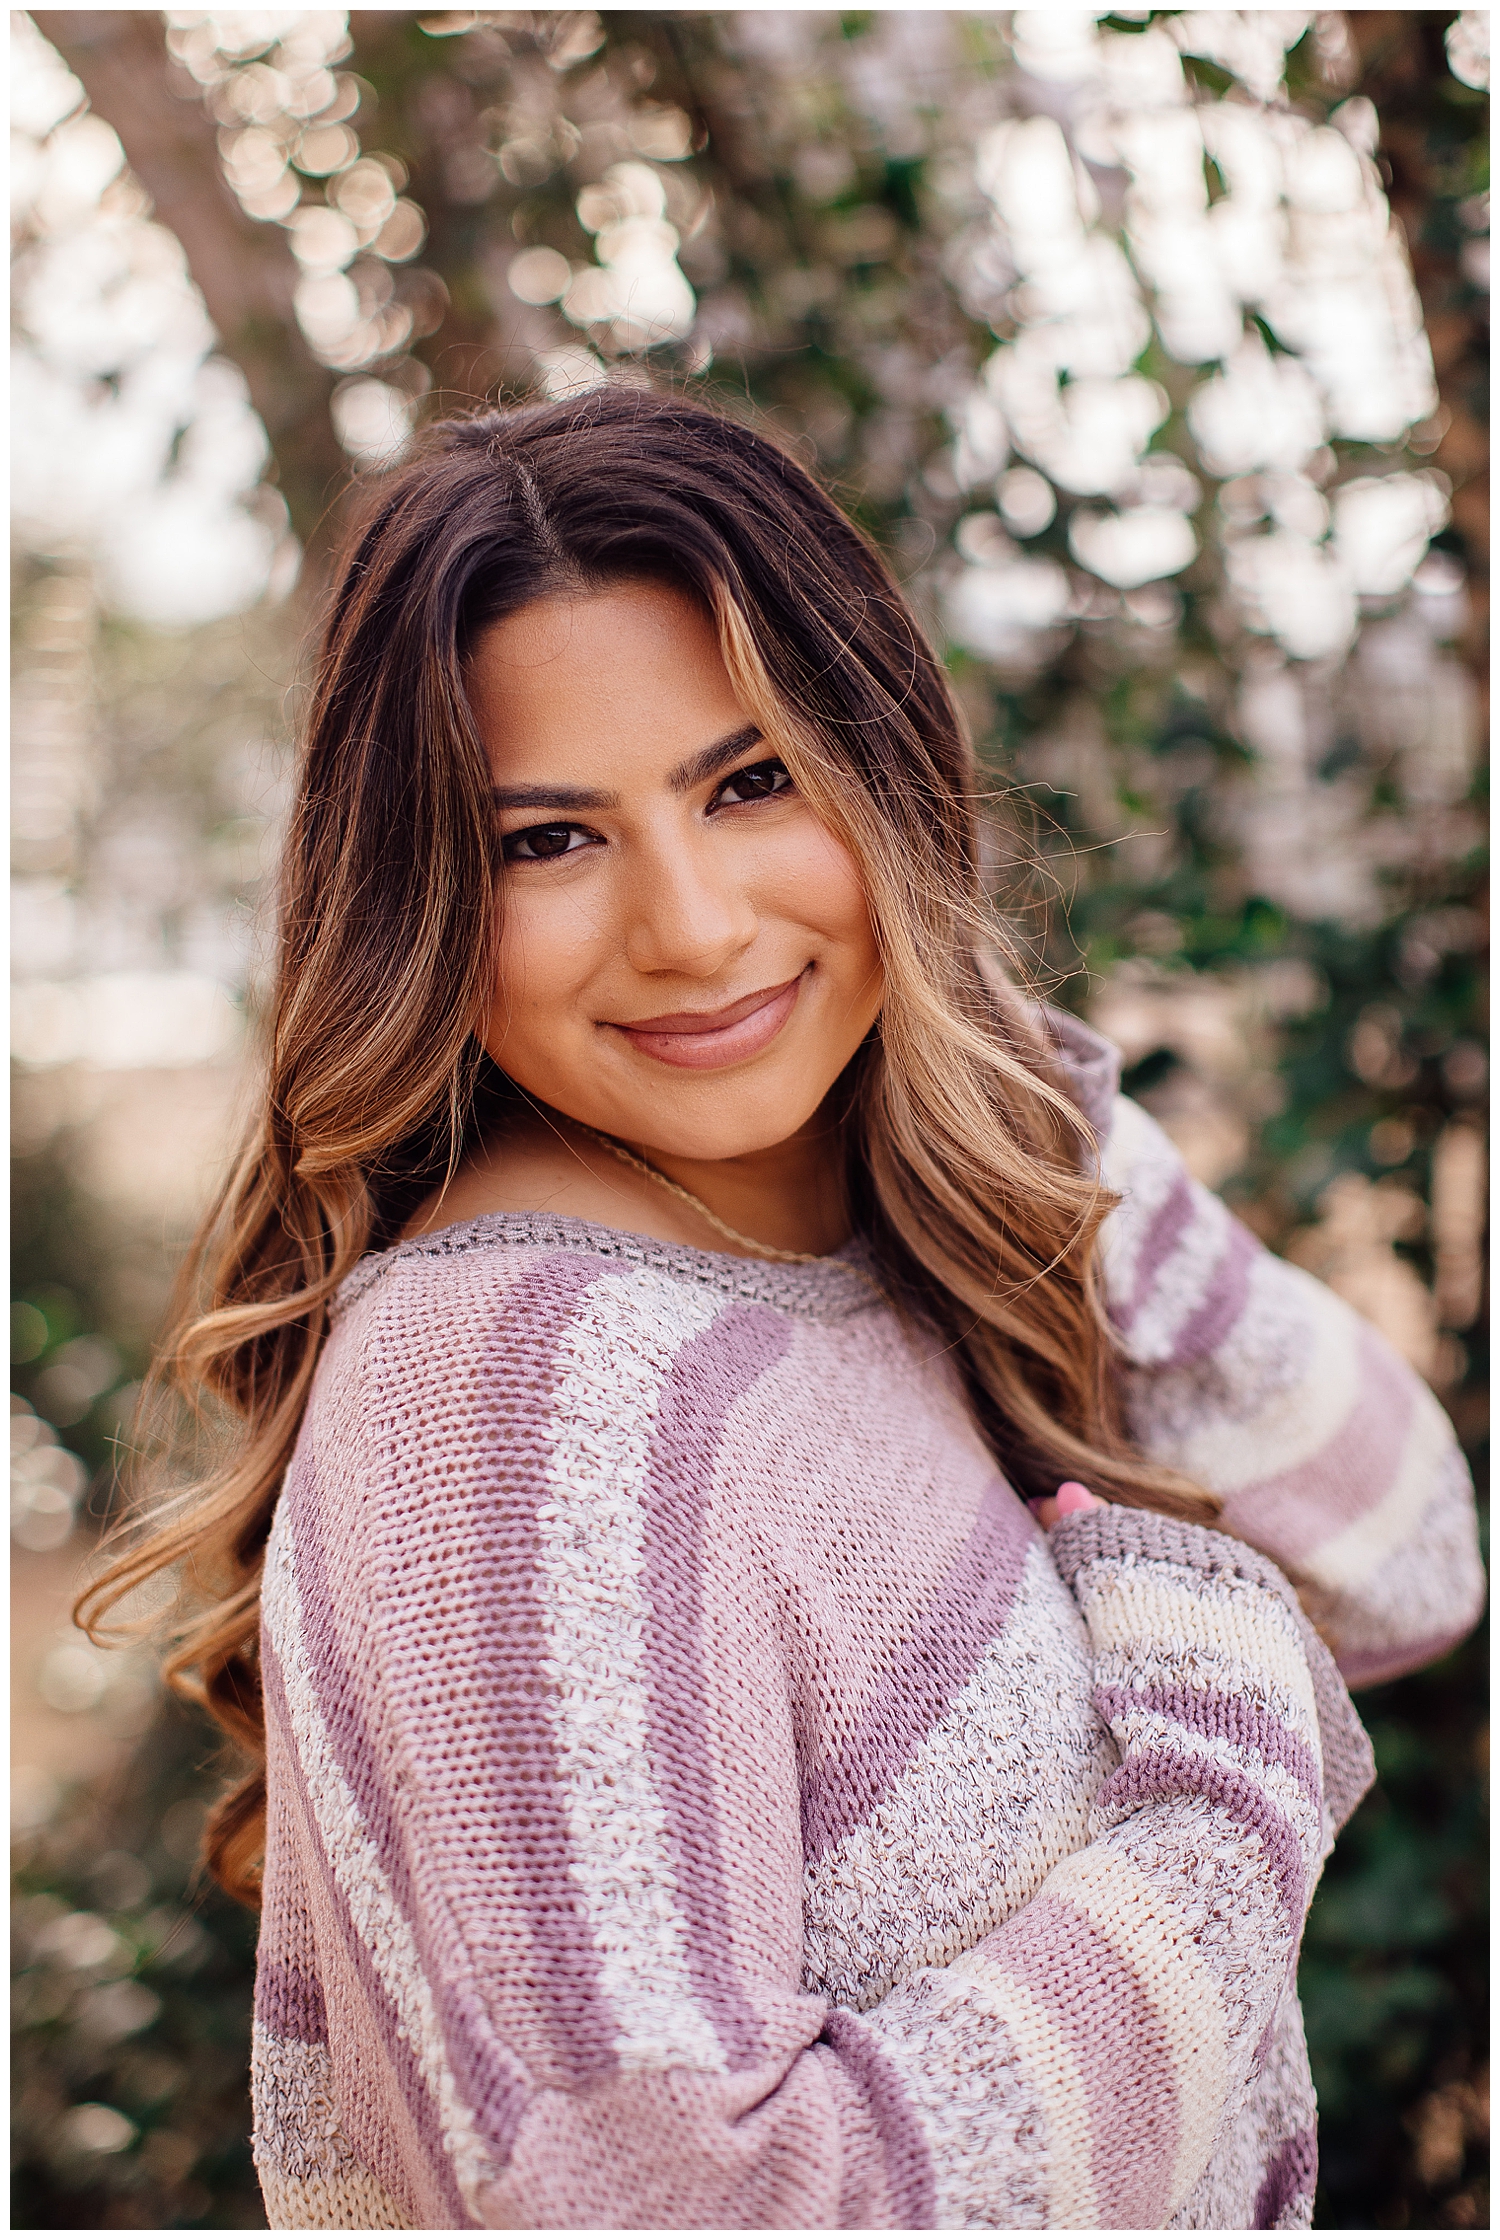 closeup image of high school senior girl smiling with hand in hair wearing purple white striped sweater outdoors Houston